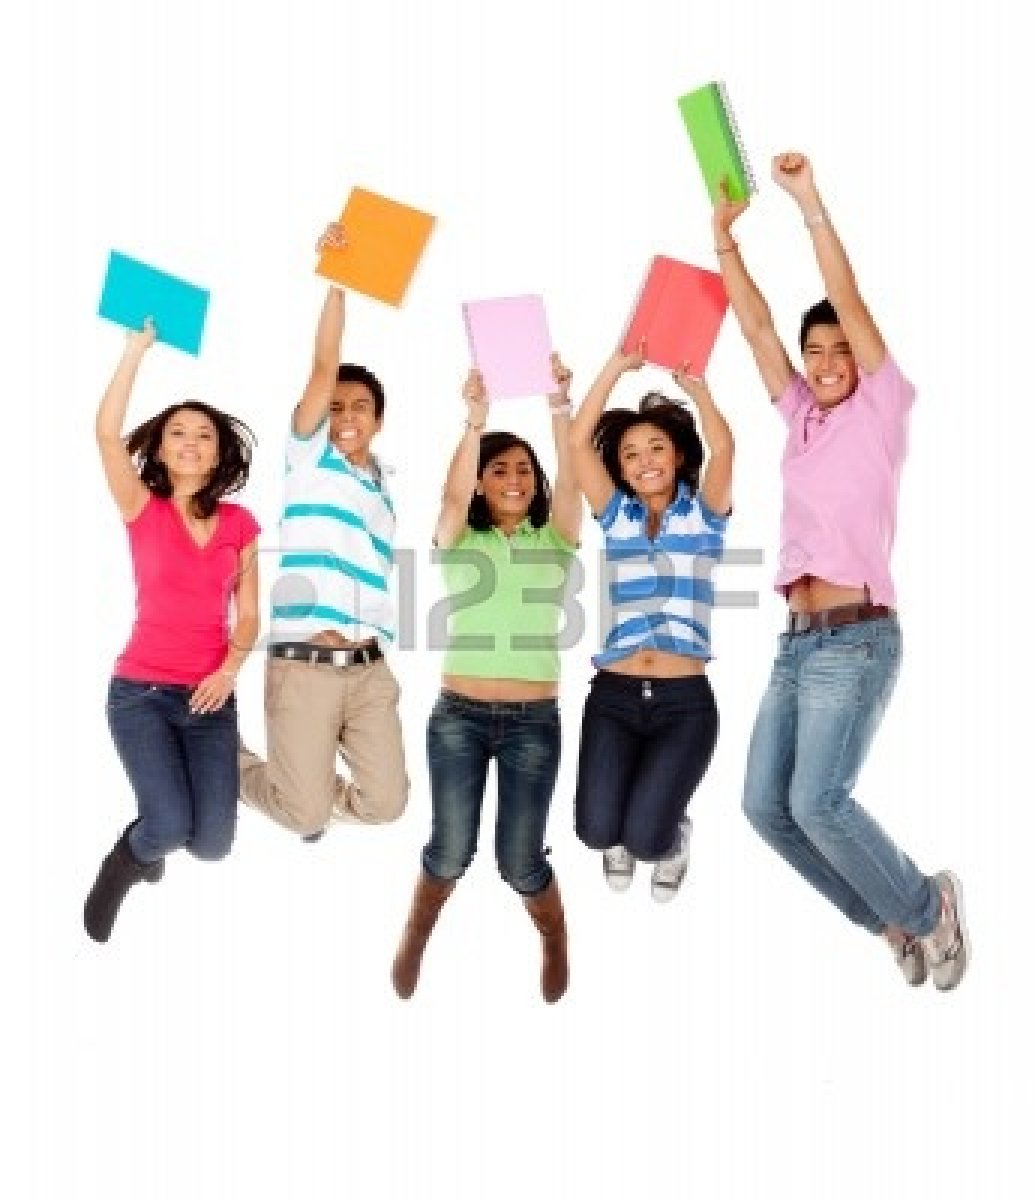 Happy Students In Classroom   Clipart Panda   Free Clipart Images